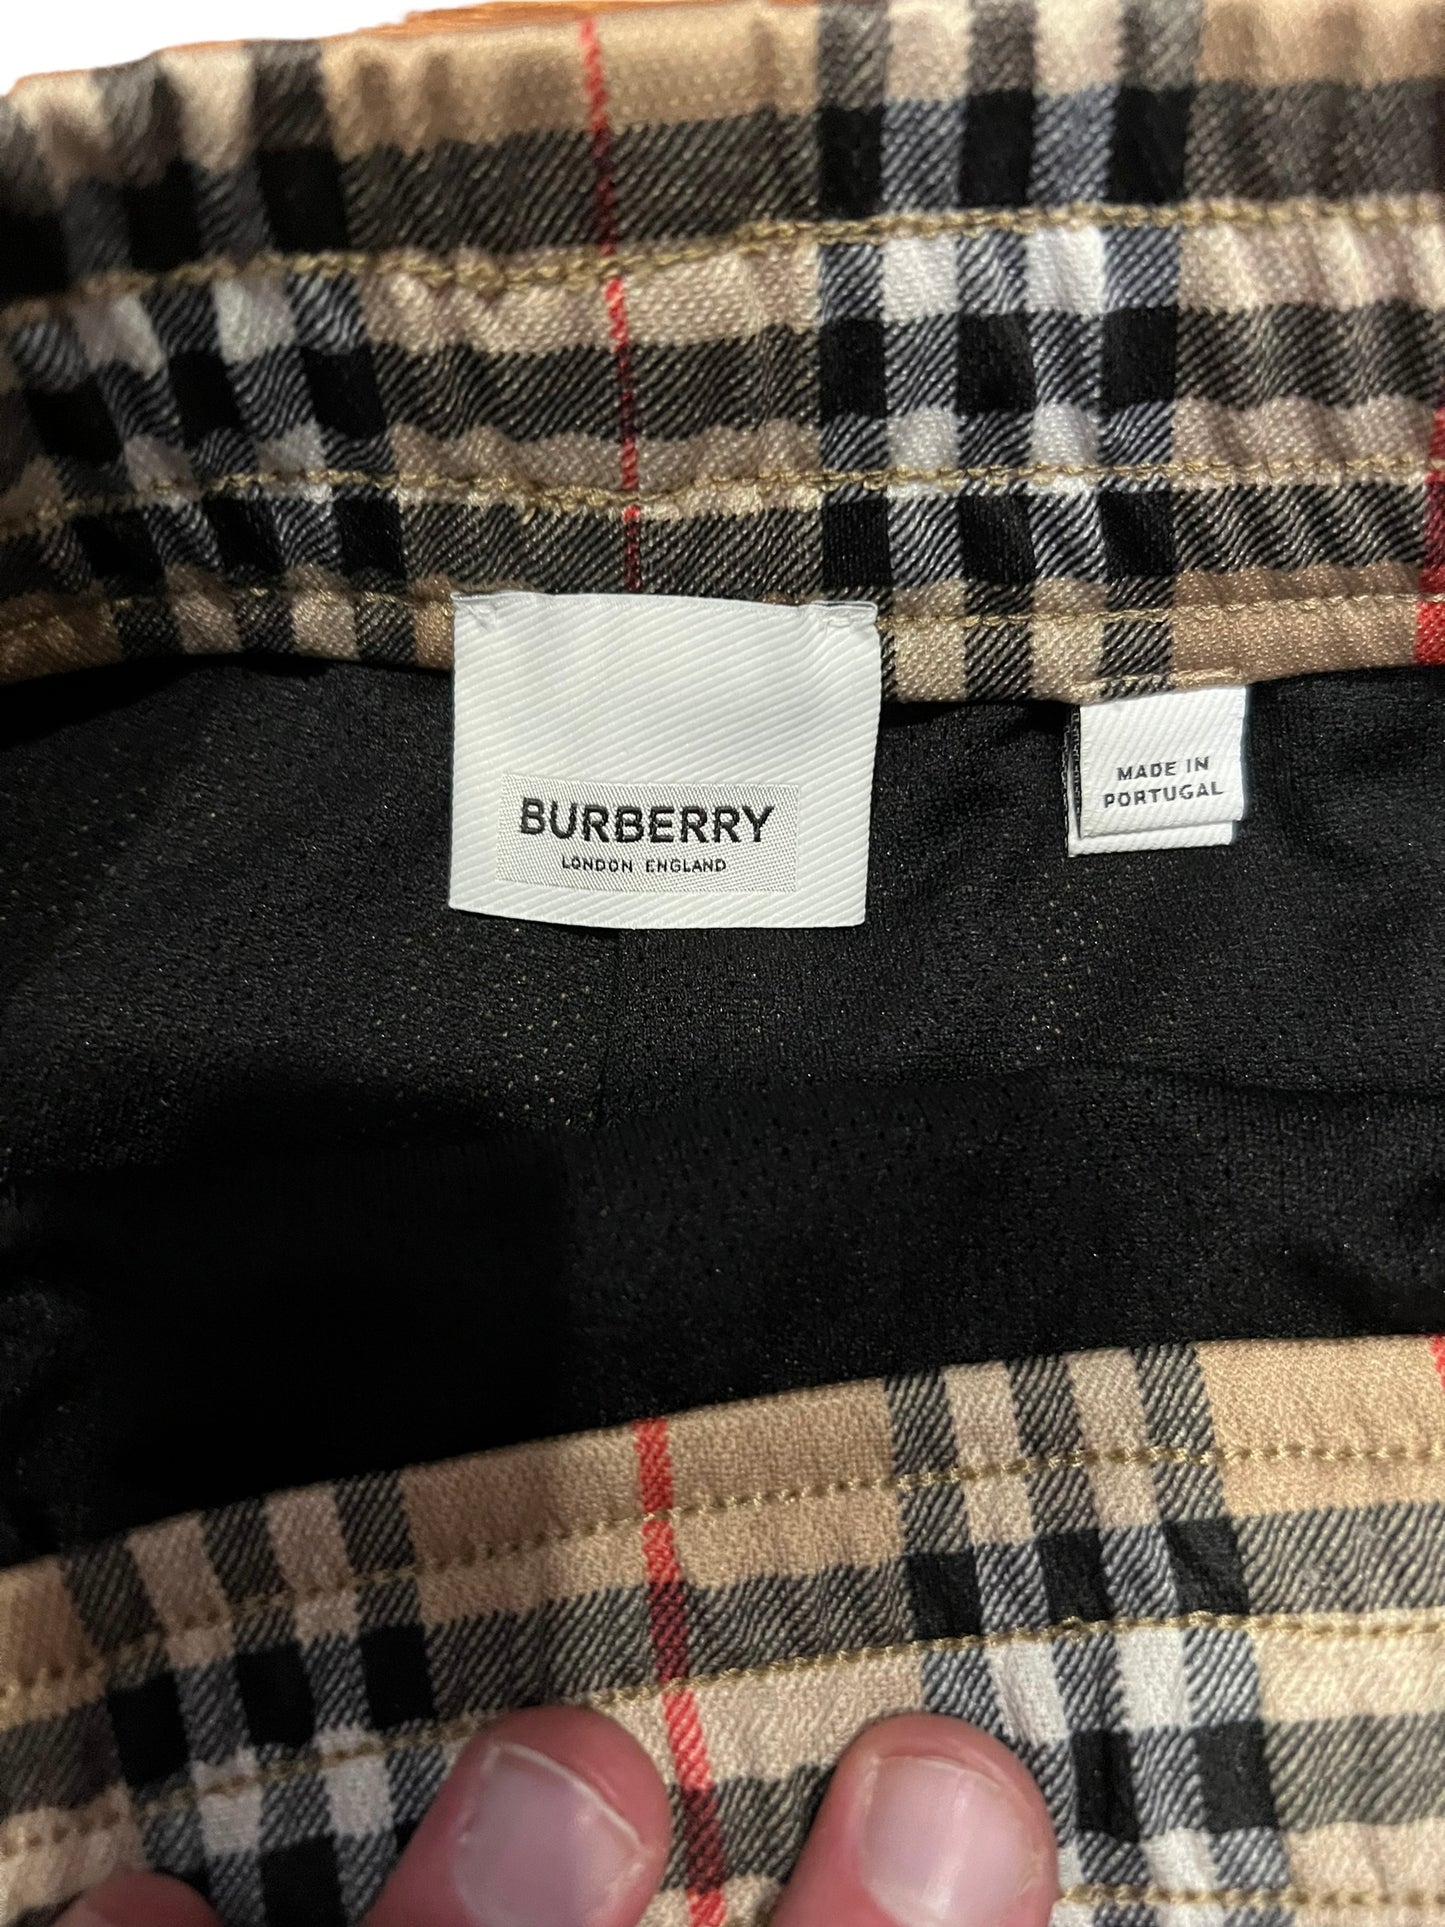 Burberry Check Shorts size S pre-owned